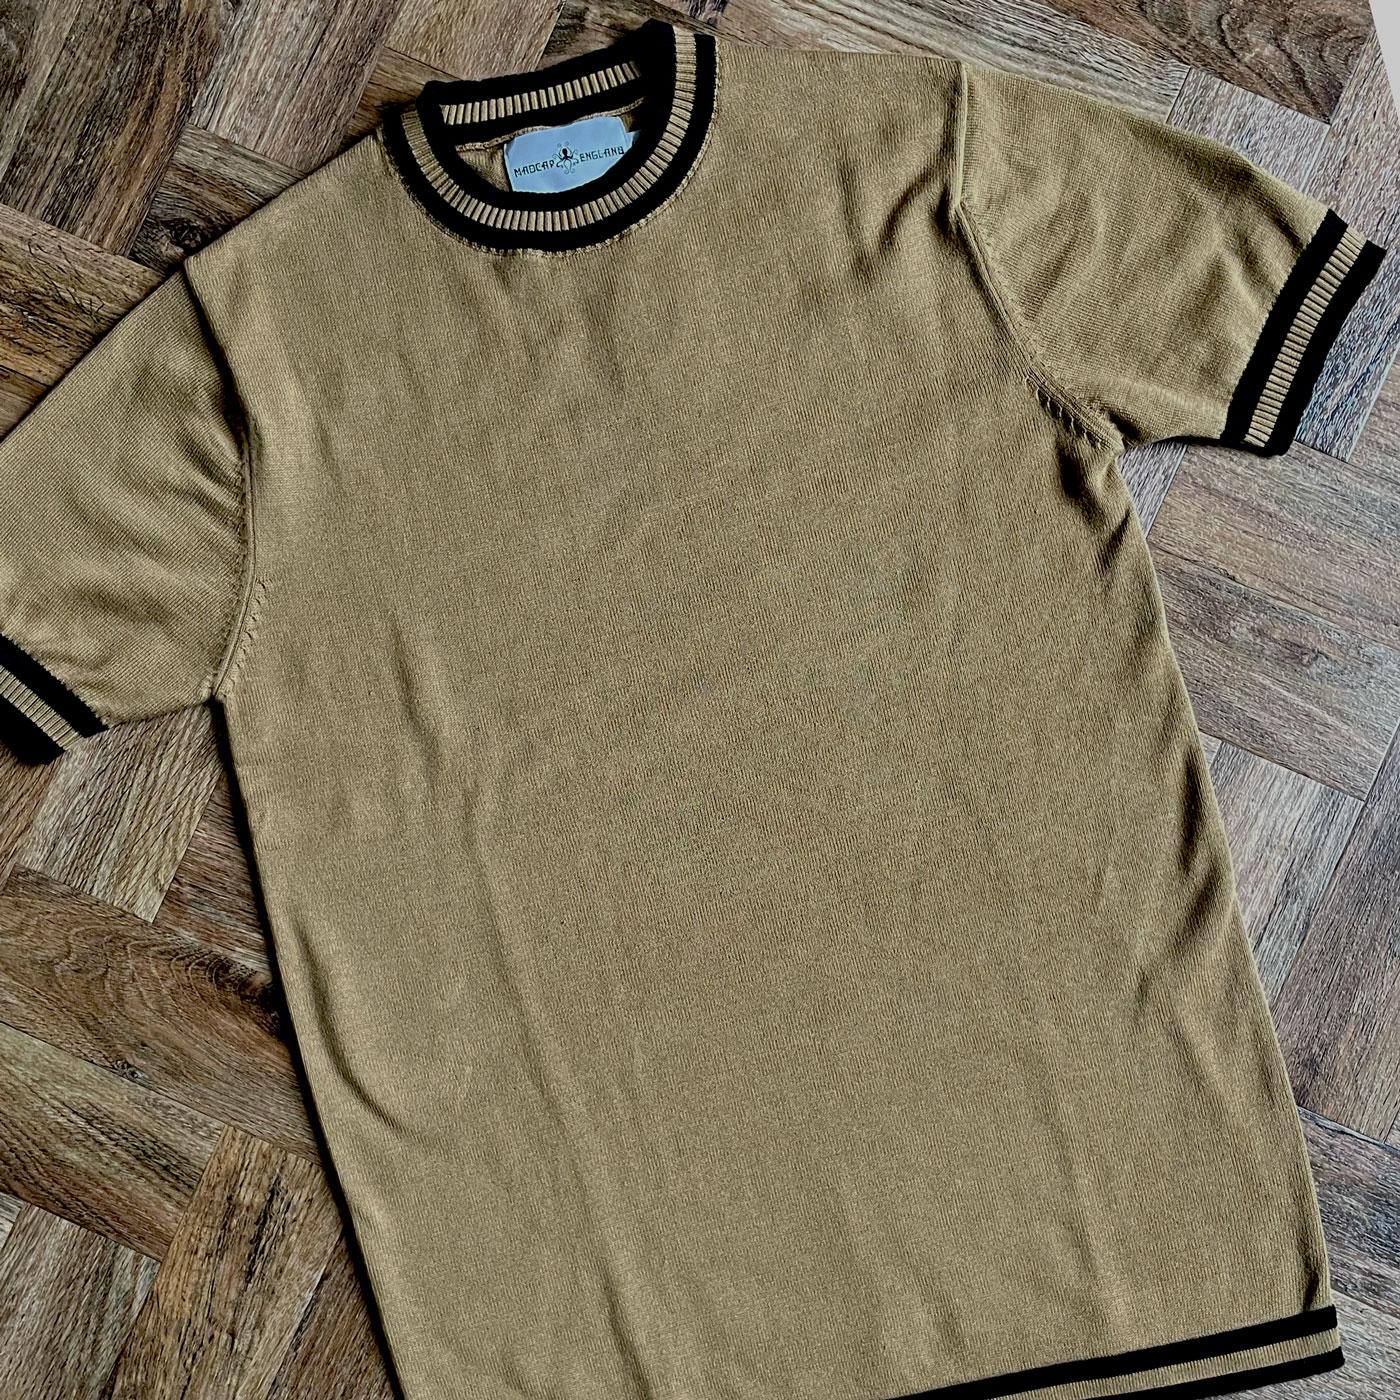 MADCAP ENGLAND Moon 60s Mod Tipped Knit Tee in Fall Leaf Caramel